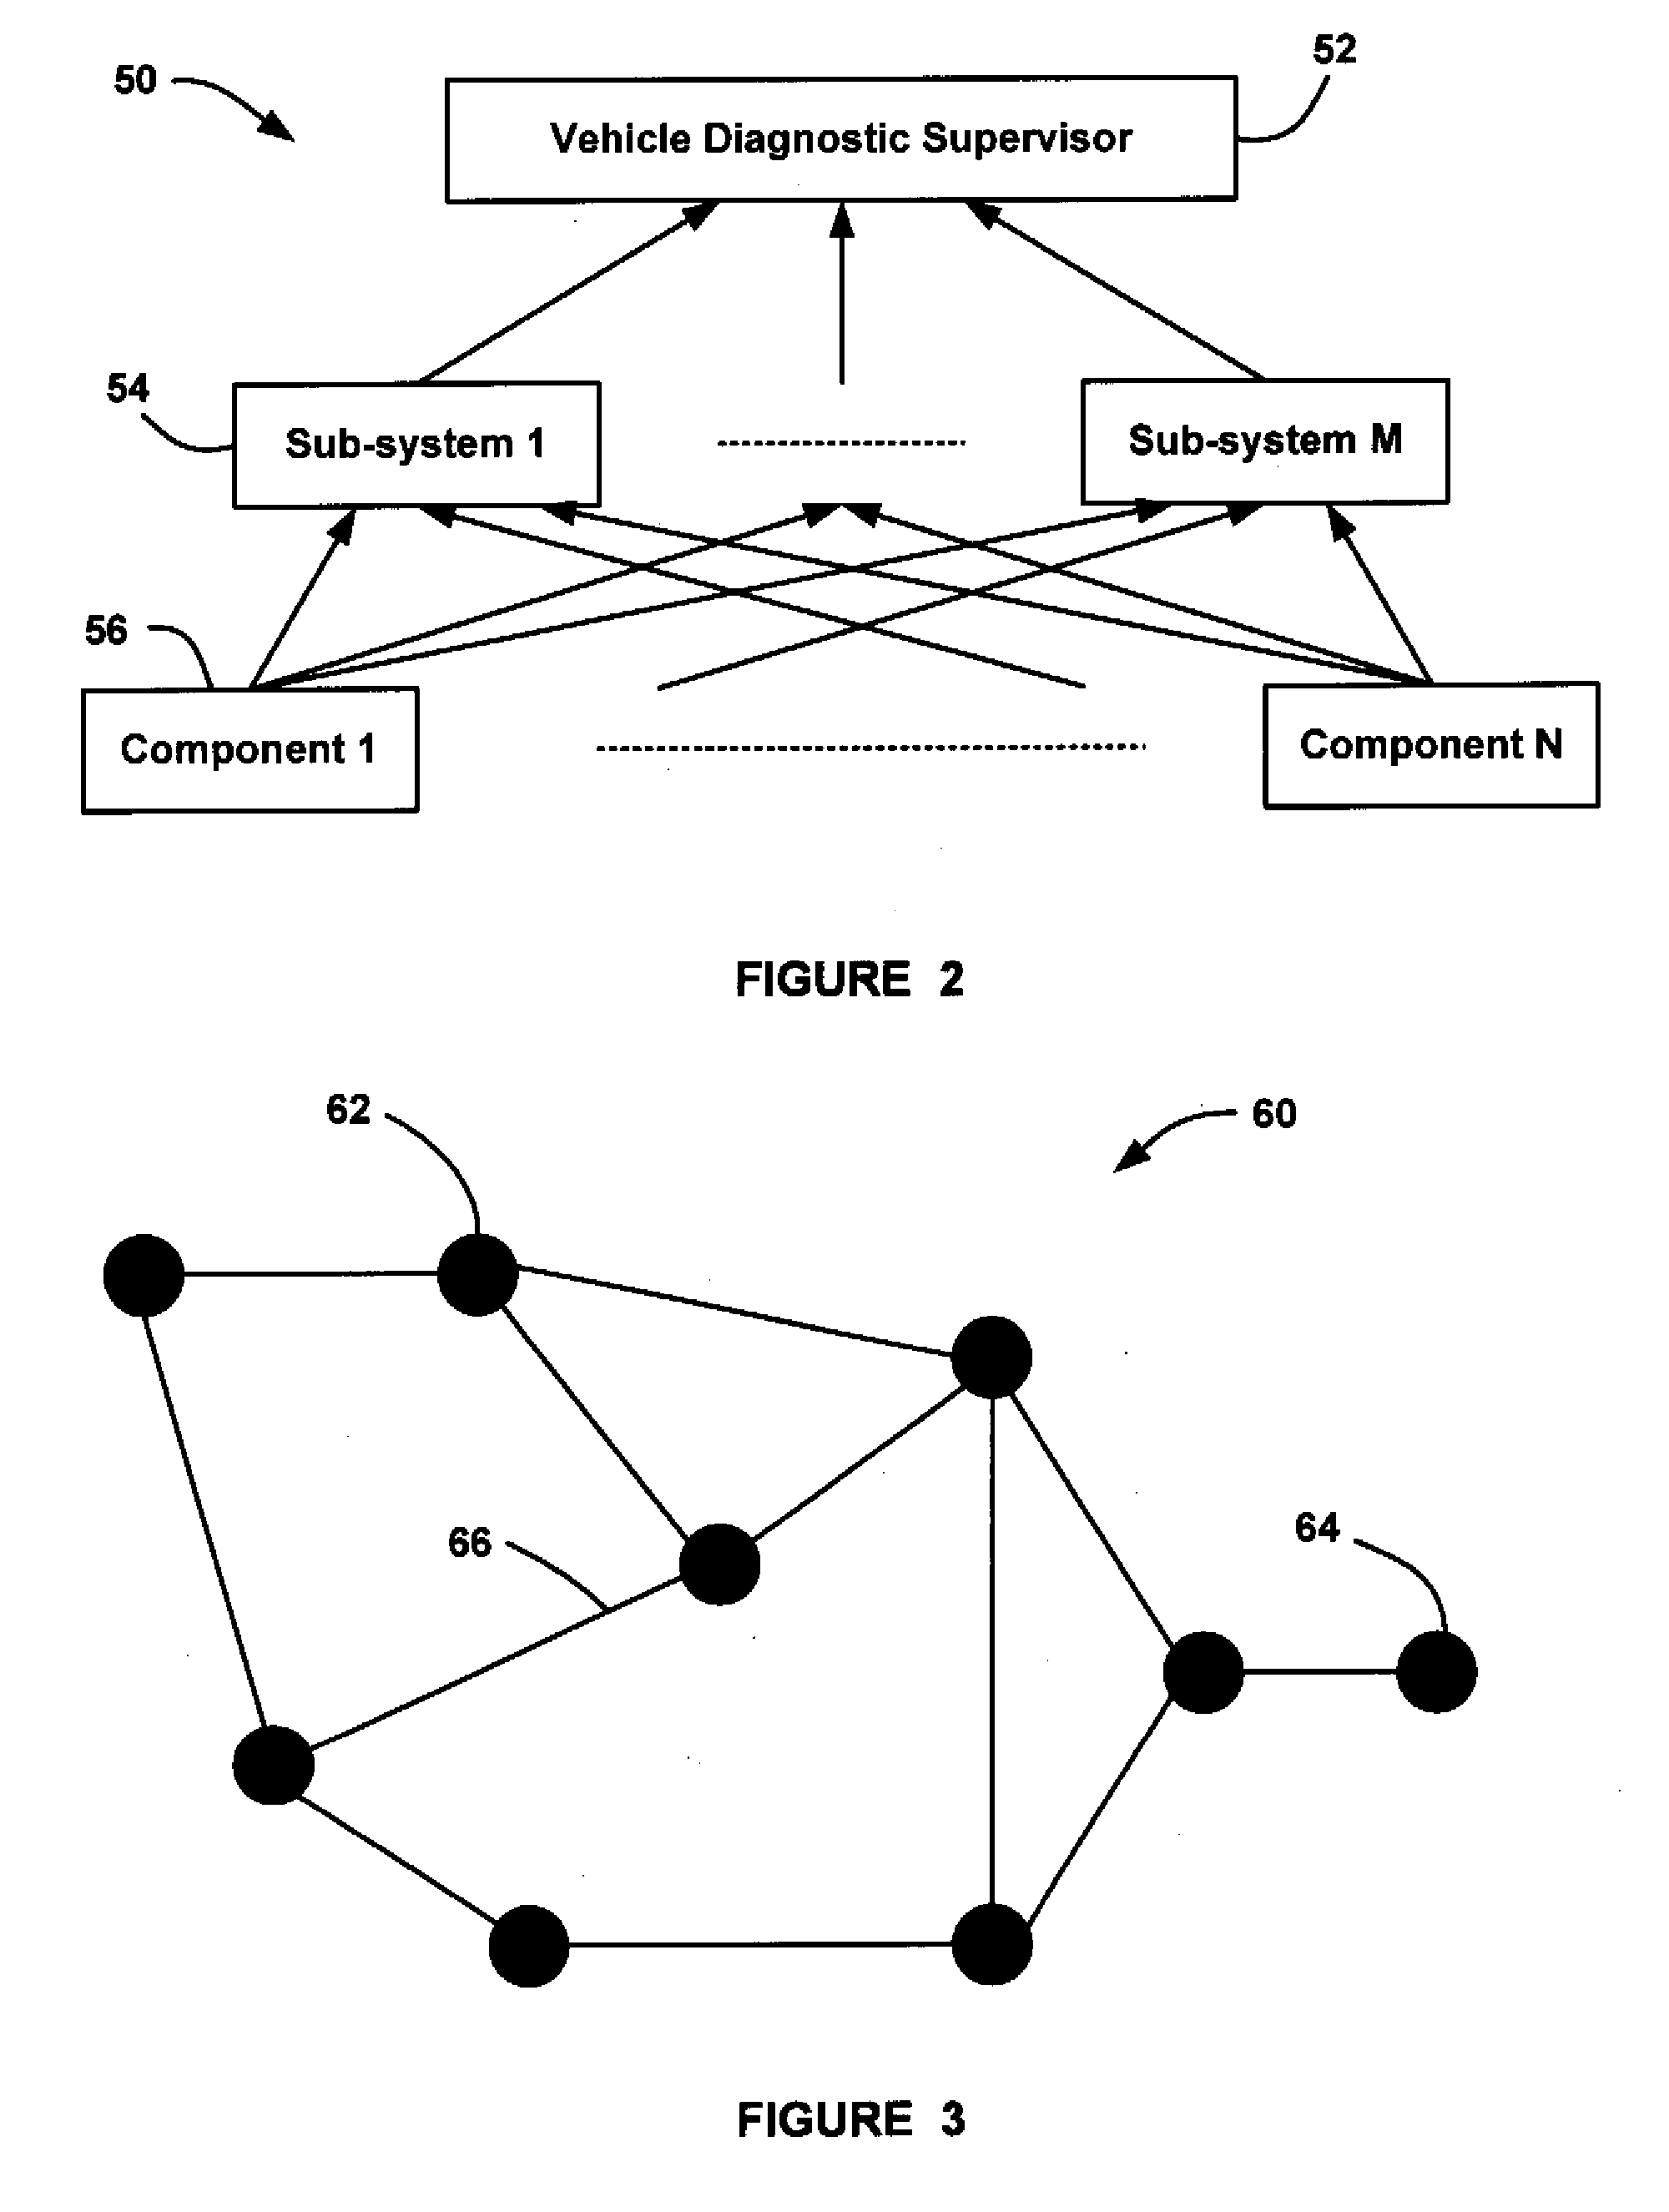 Integrated hierarchical process for fault detection and isolation